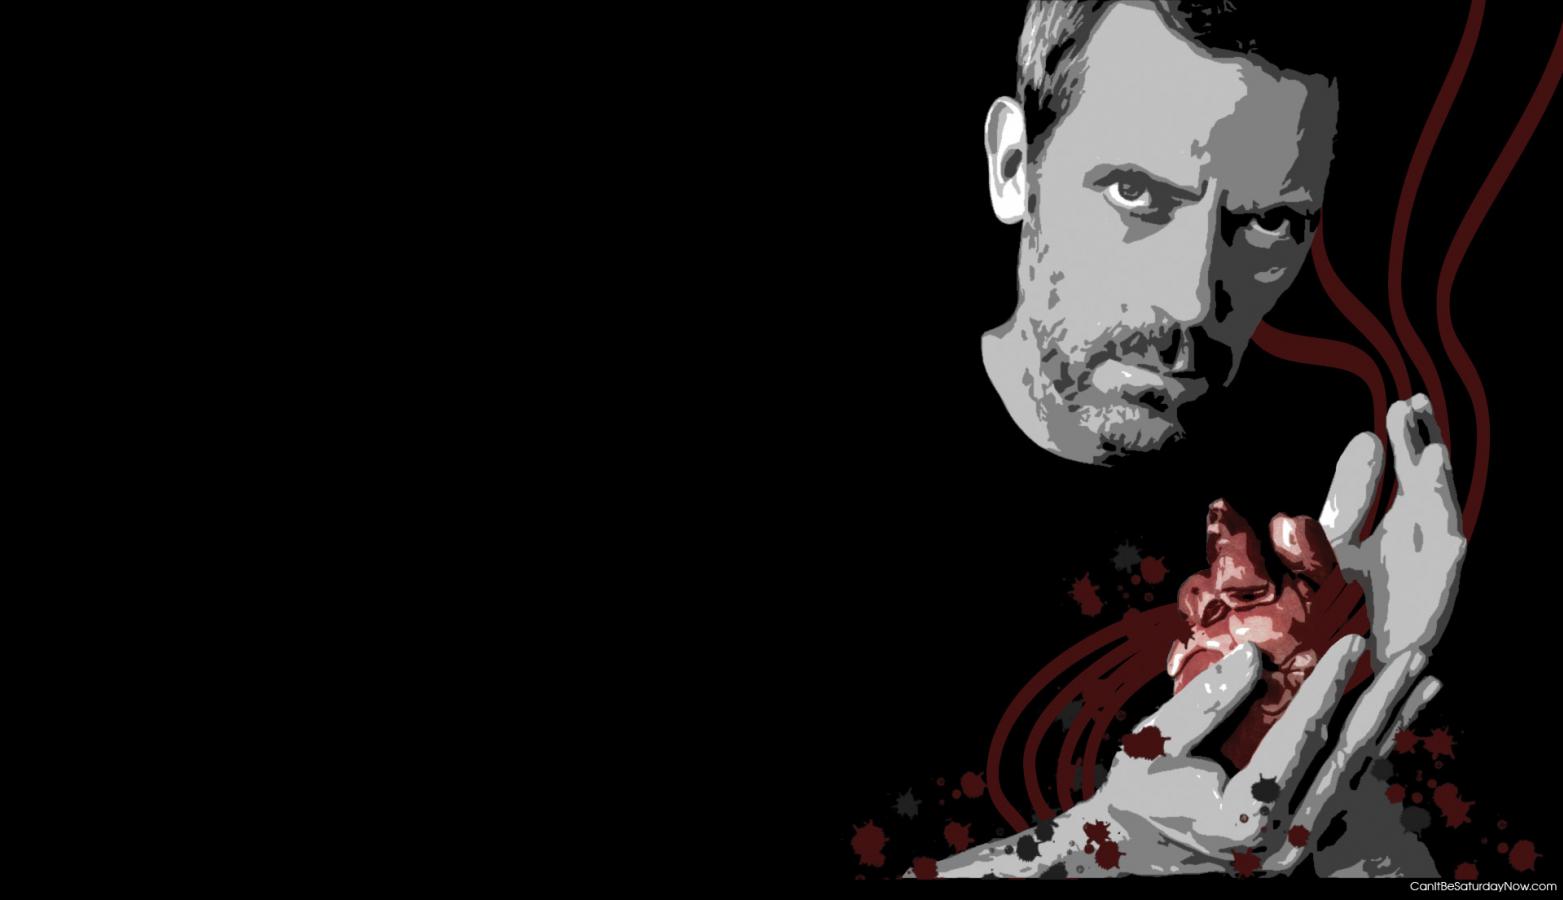 House hart - Dr house has your heart